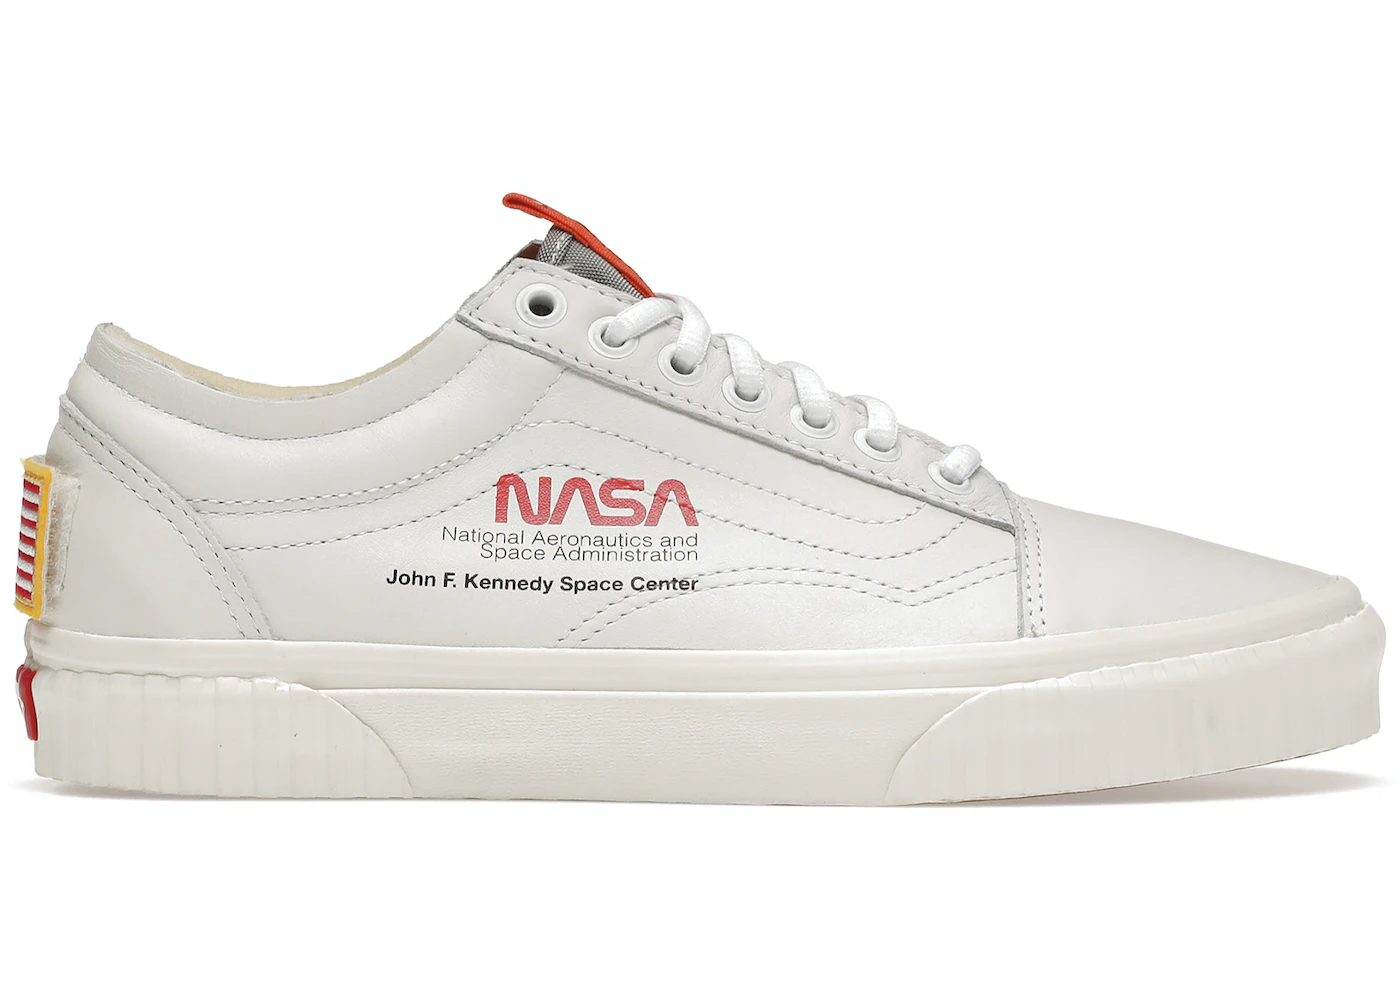 sextant future Grand Vans Old Skool NASA Space Voyager True White - VN0A38G1UP9/VN0A38G1UP91 - US